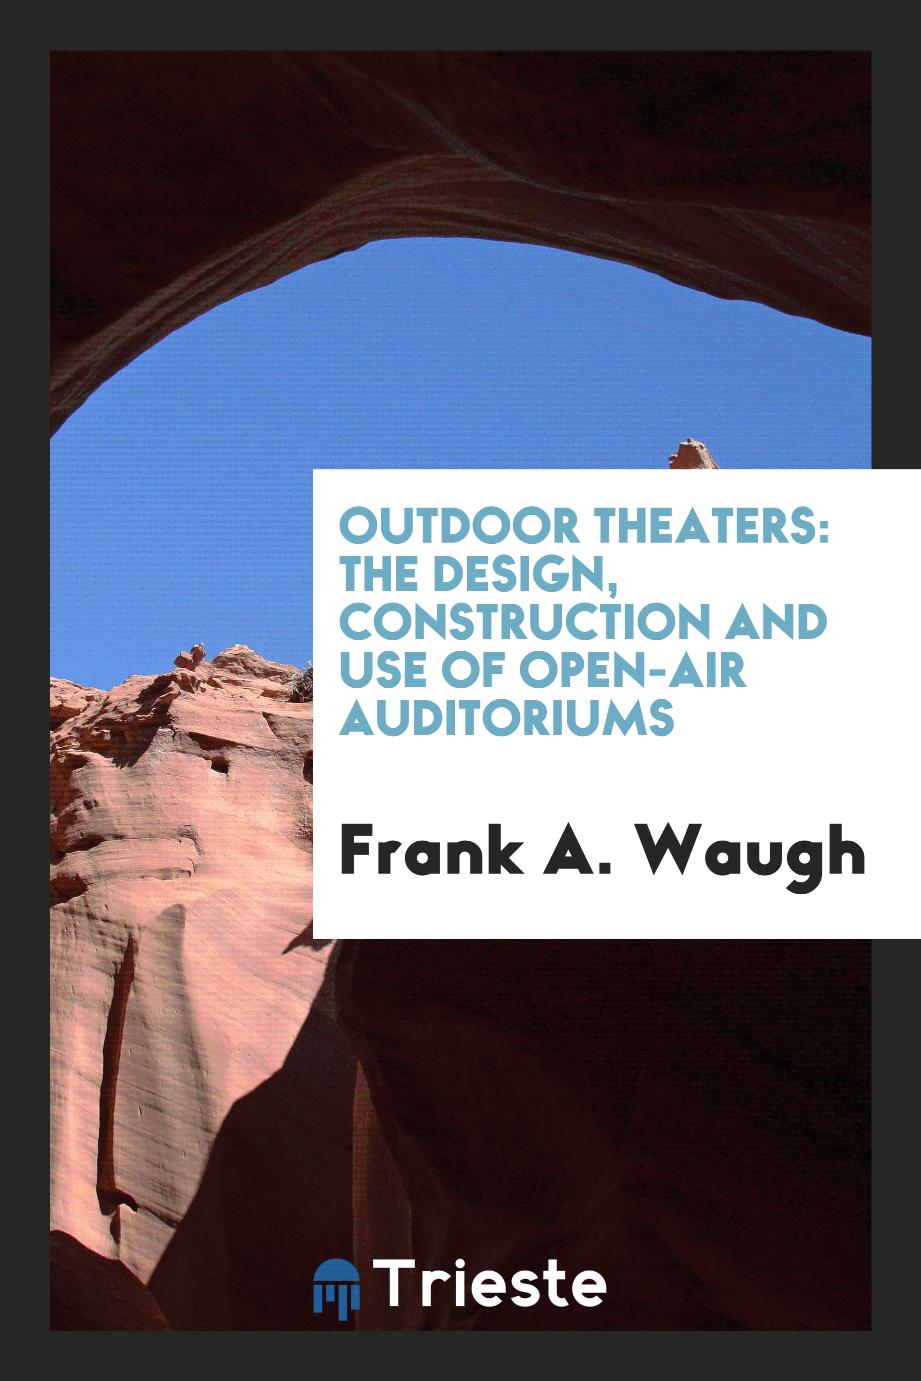 Outdoor theaters: the design, construction and use of open-air auditoriums